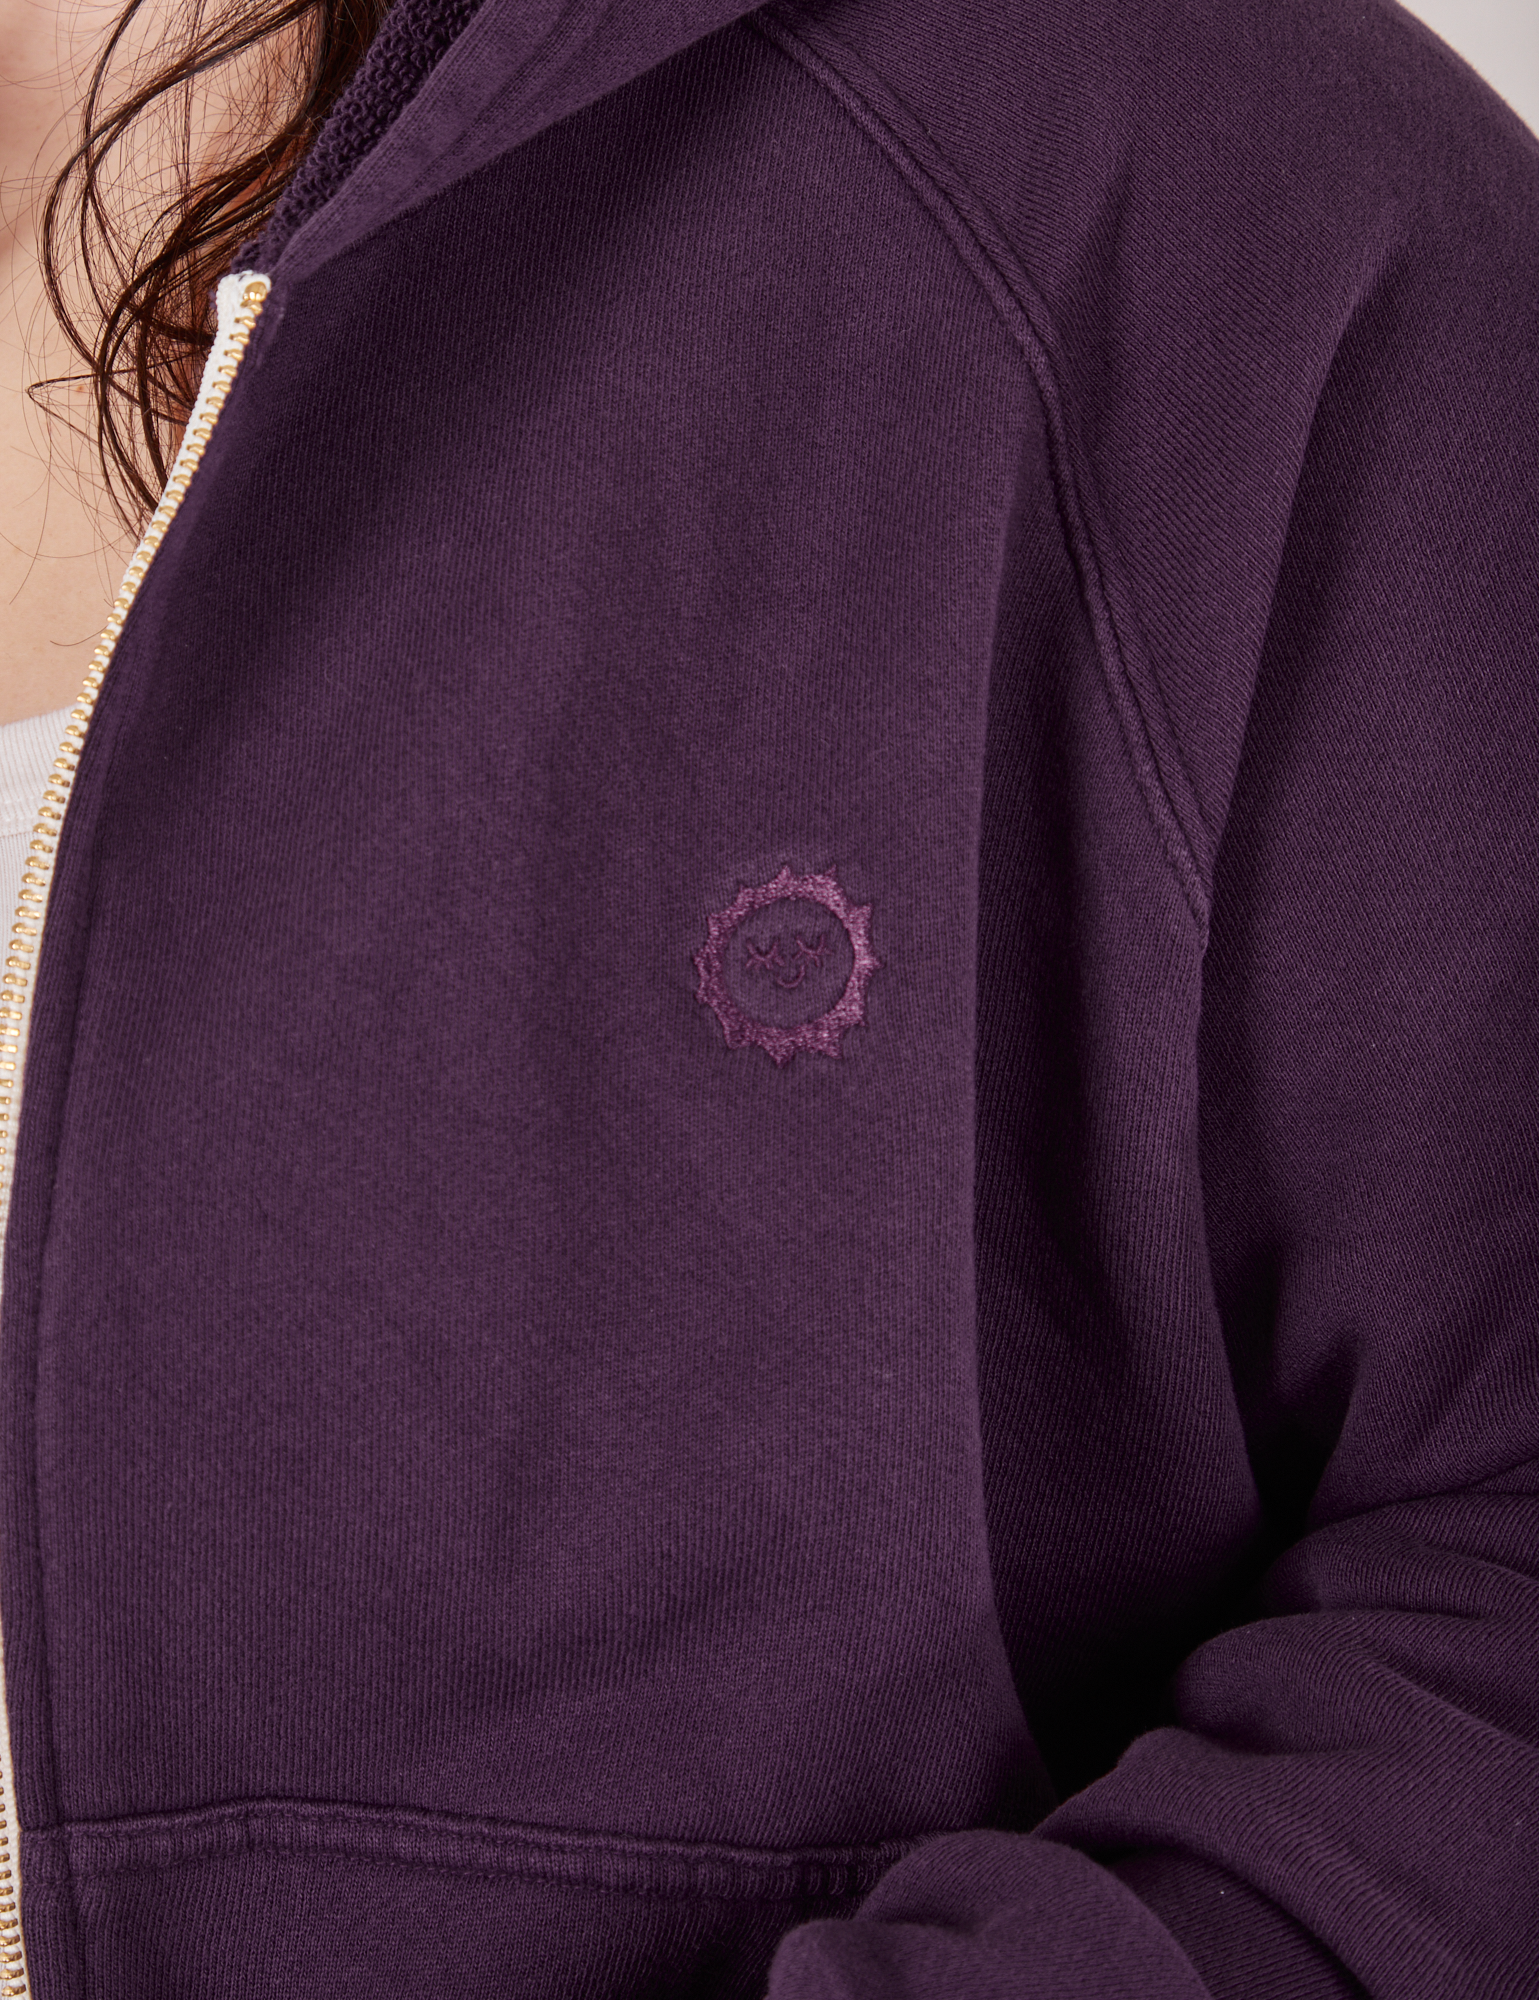 Cropped Zip Hoodie in Nebula Purple front close up.